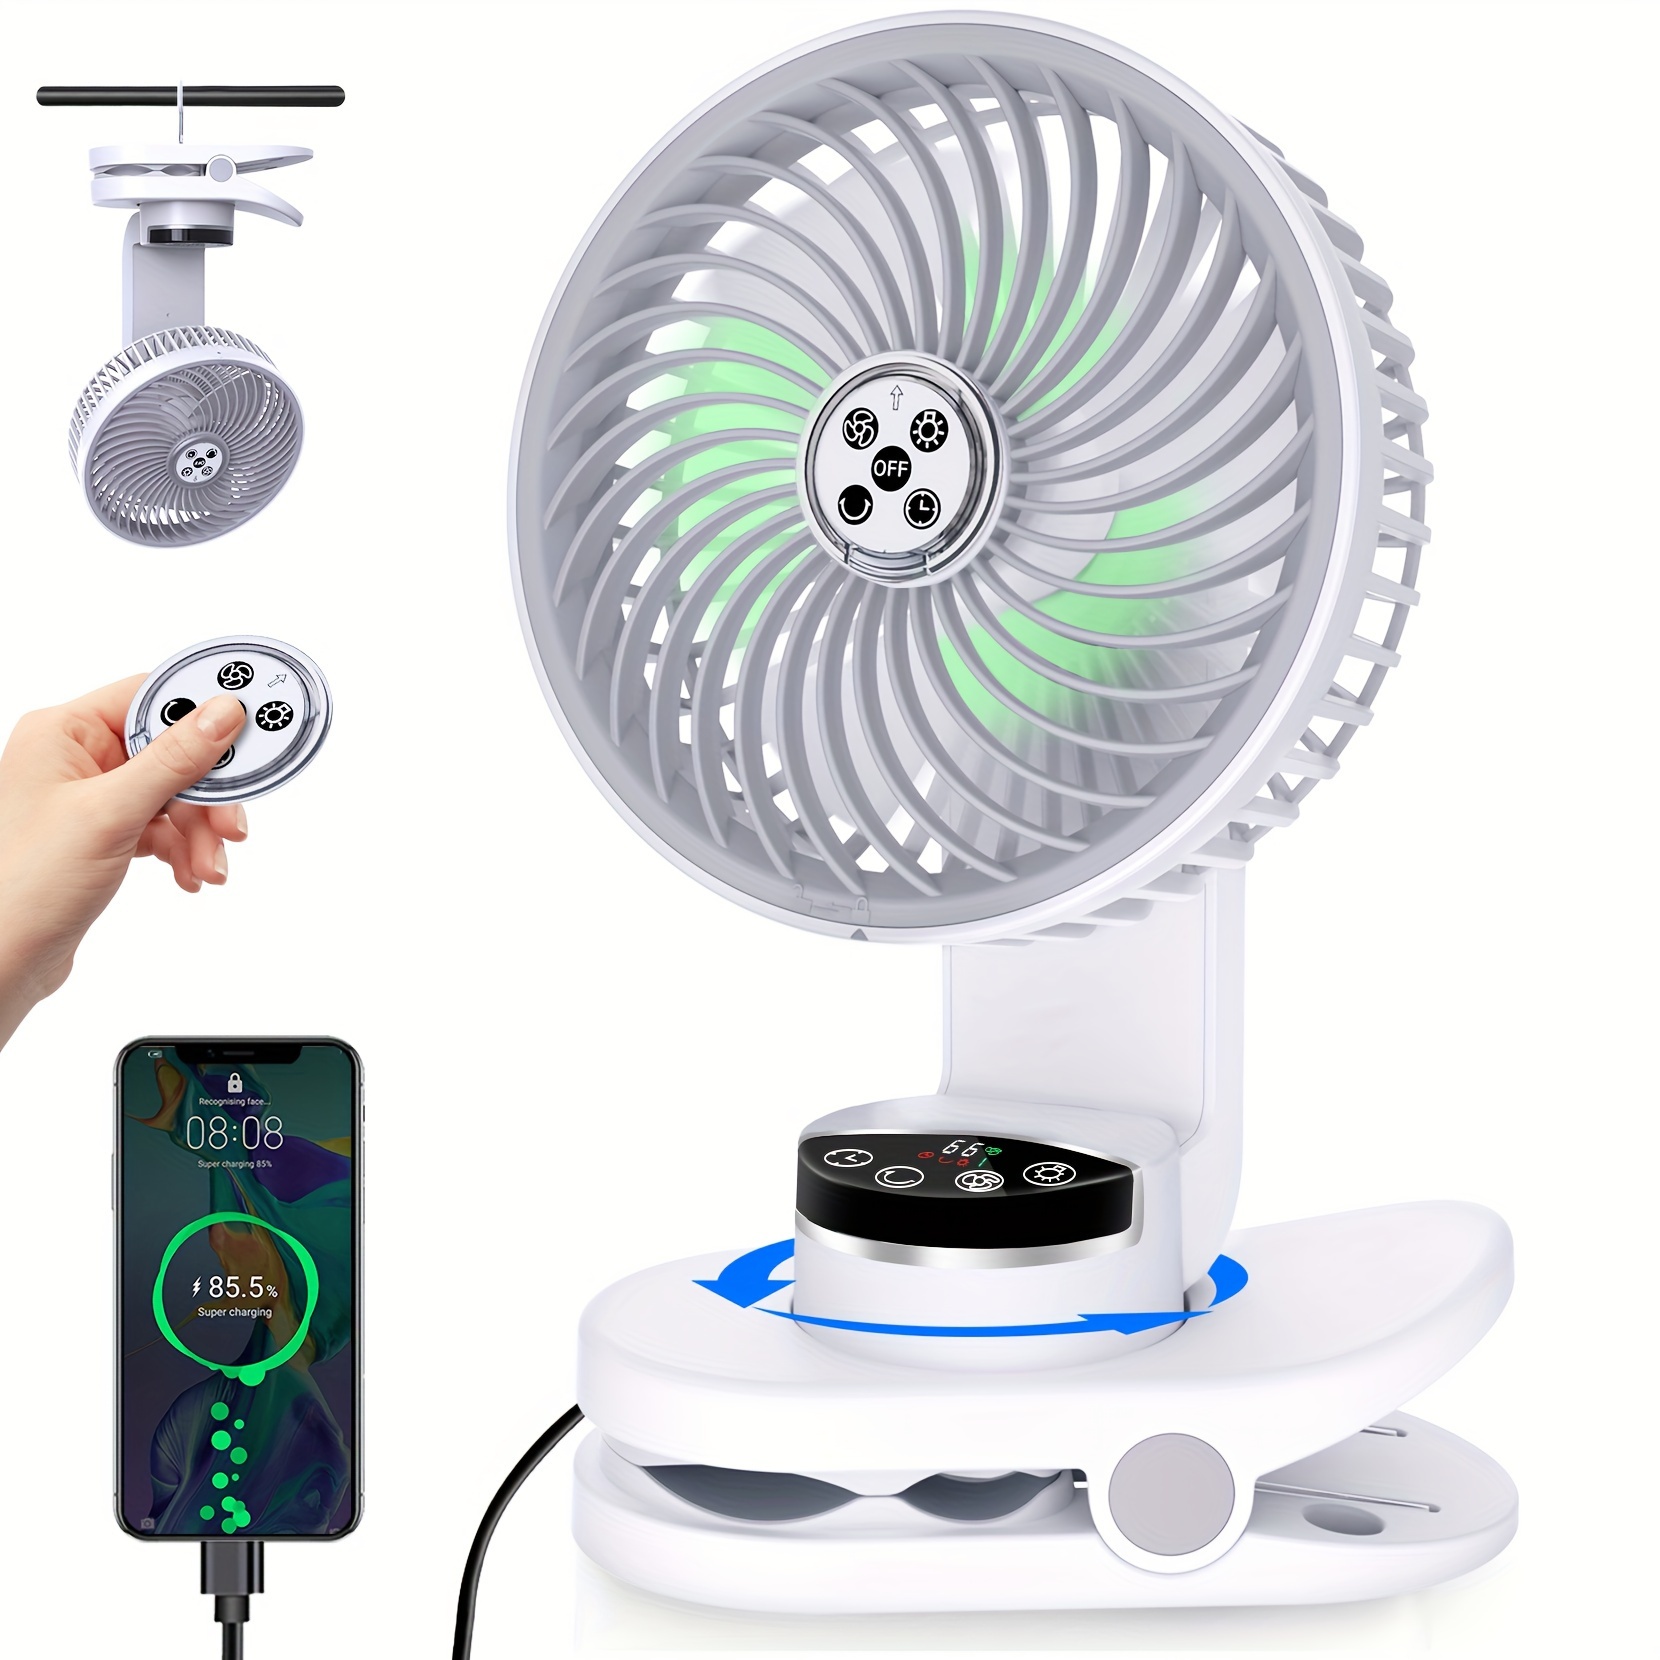 

8 Inch Clip On Fan, 10000mah Battery Operated Desk Fan With 9 Speeds, Auto Oscillation Rechargeable Camping Fan With Atmosphere Light And Remote, Usb-c Powered Fan For Office Desktop Outdoor